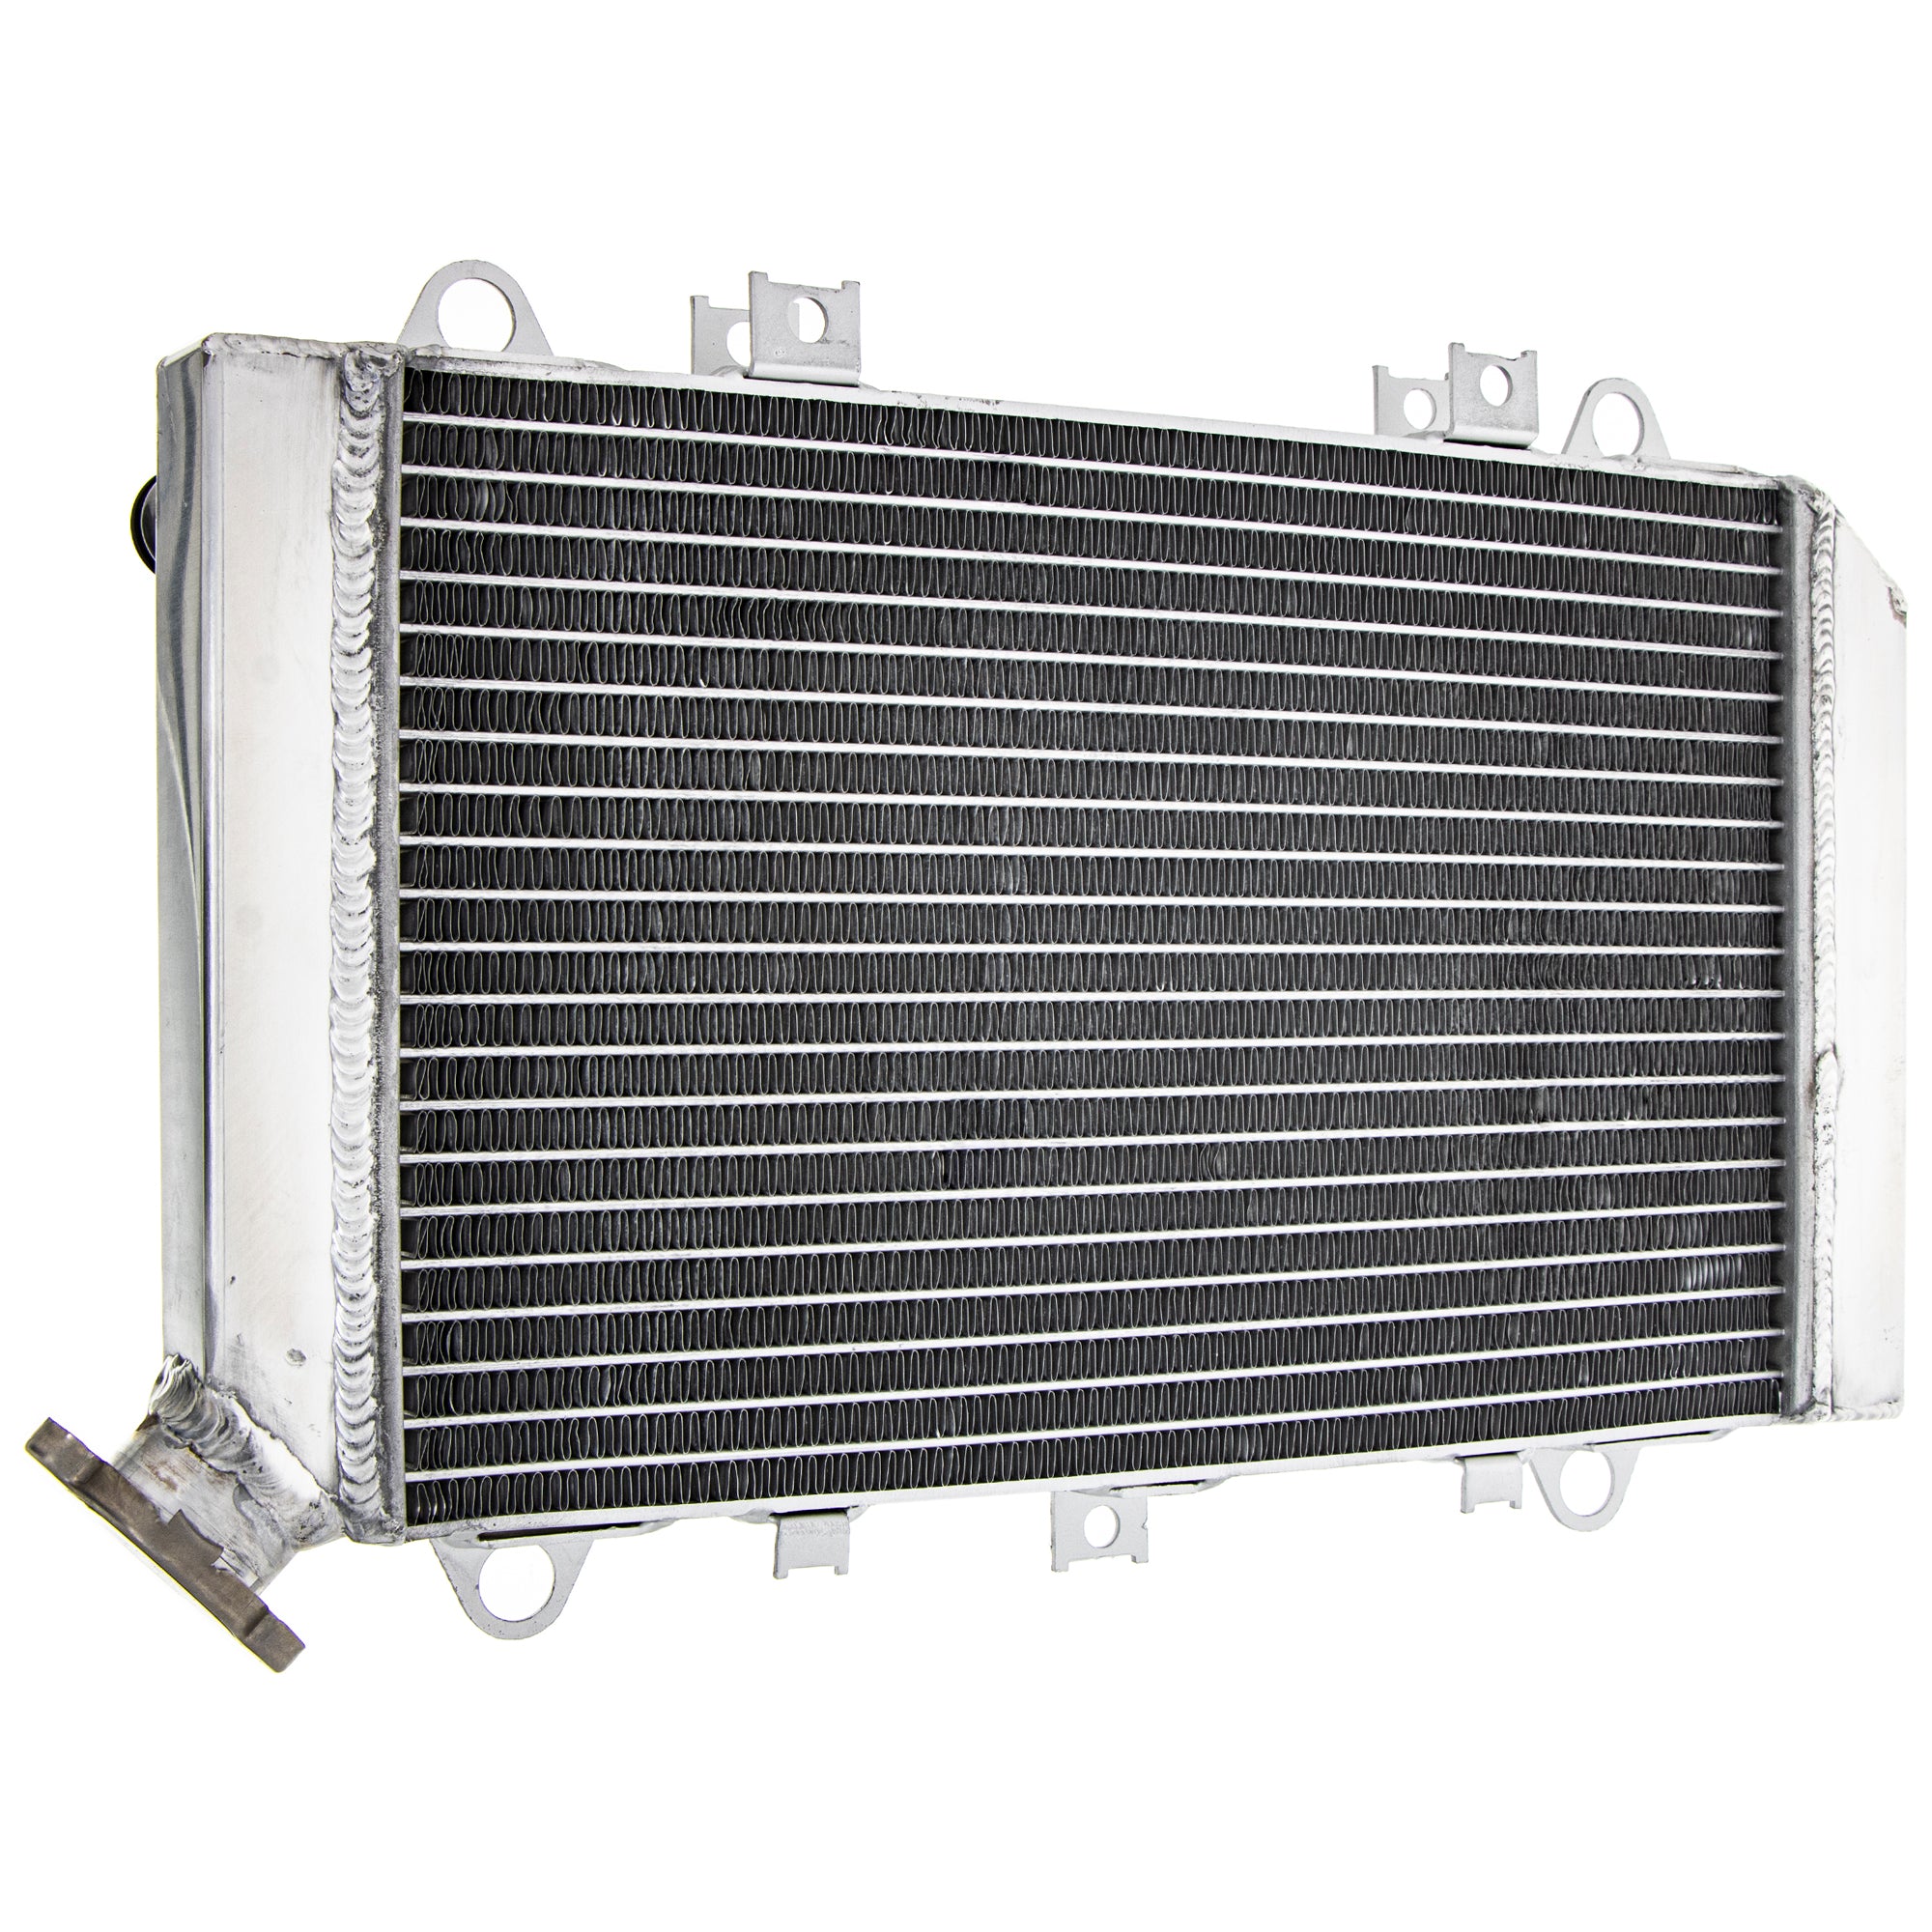 NICHE 519-CRD2243A High Capacity Radiator for zOTHER Mule